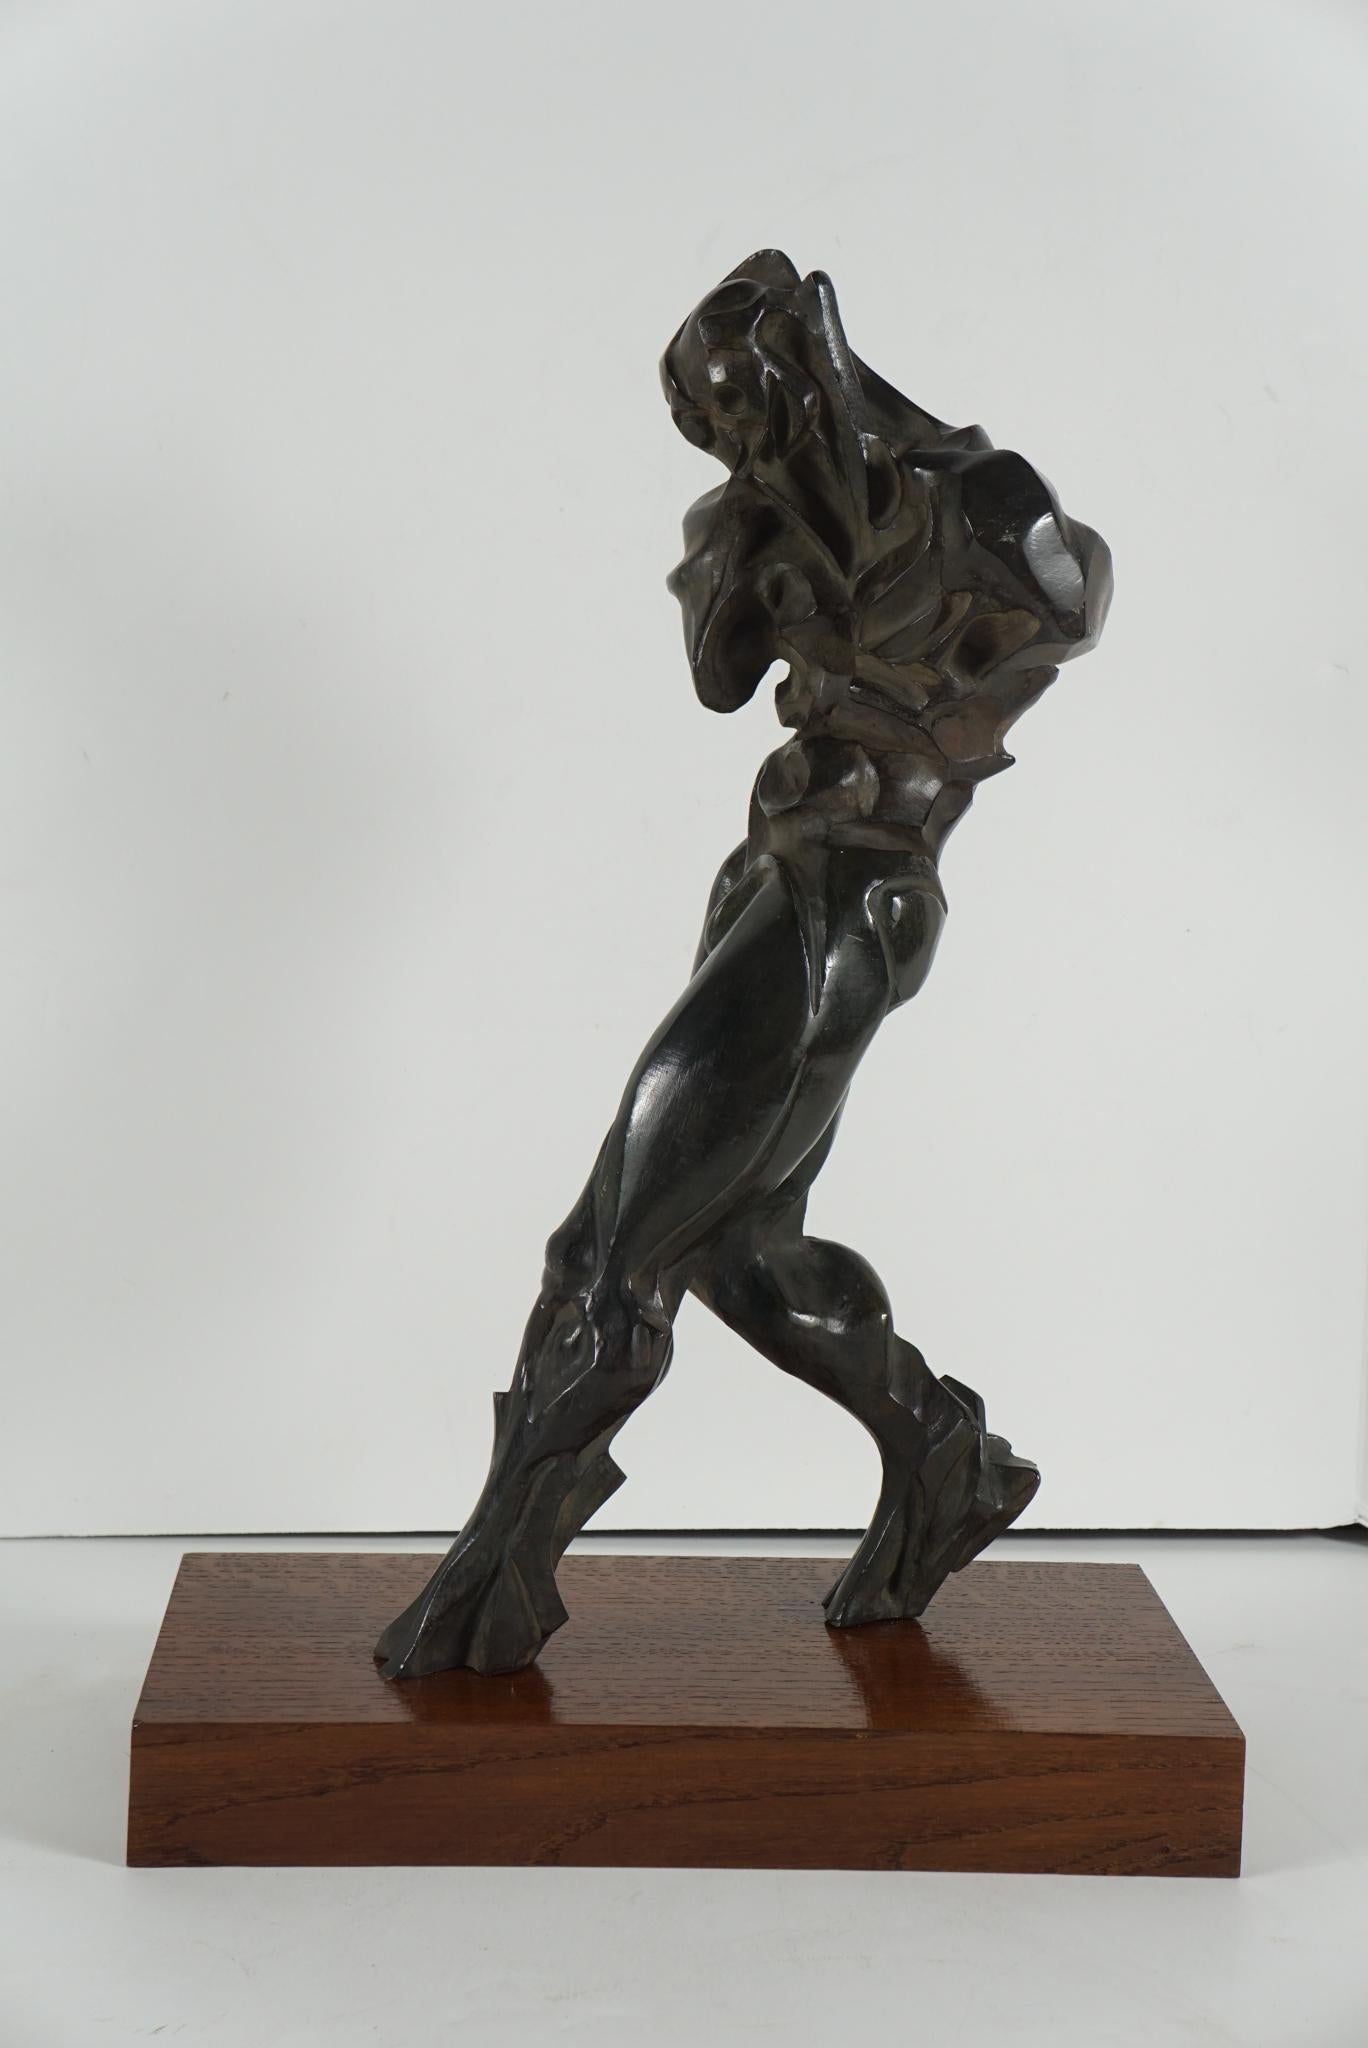 Cast Bronze work by Paris based artist and sculptor Manuel Fernandez entitled “The Walker” cast in 2001. The original single work, done in 2000, has a solid cast bronze slab base as part of the work's body and here the work has been reinterpreted by